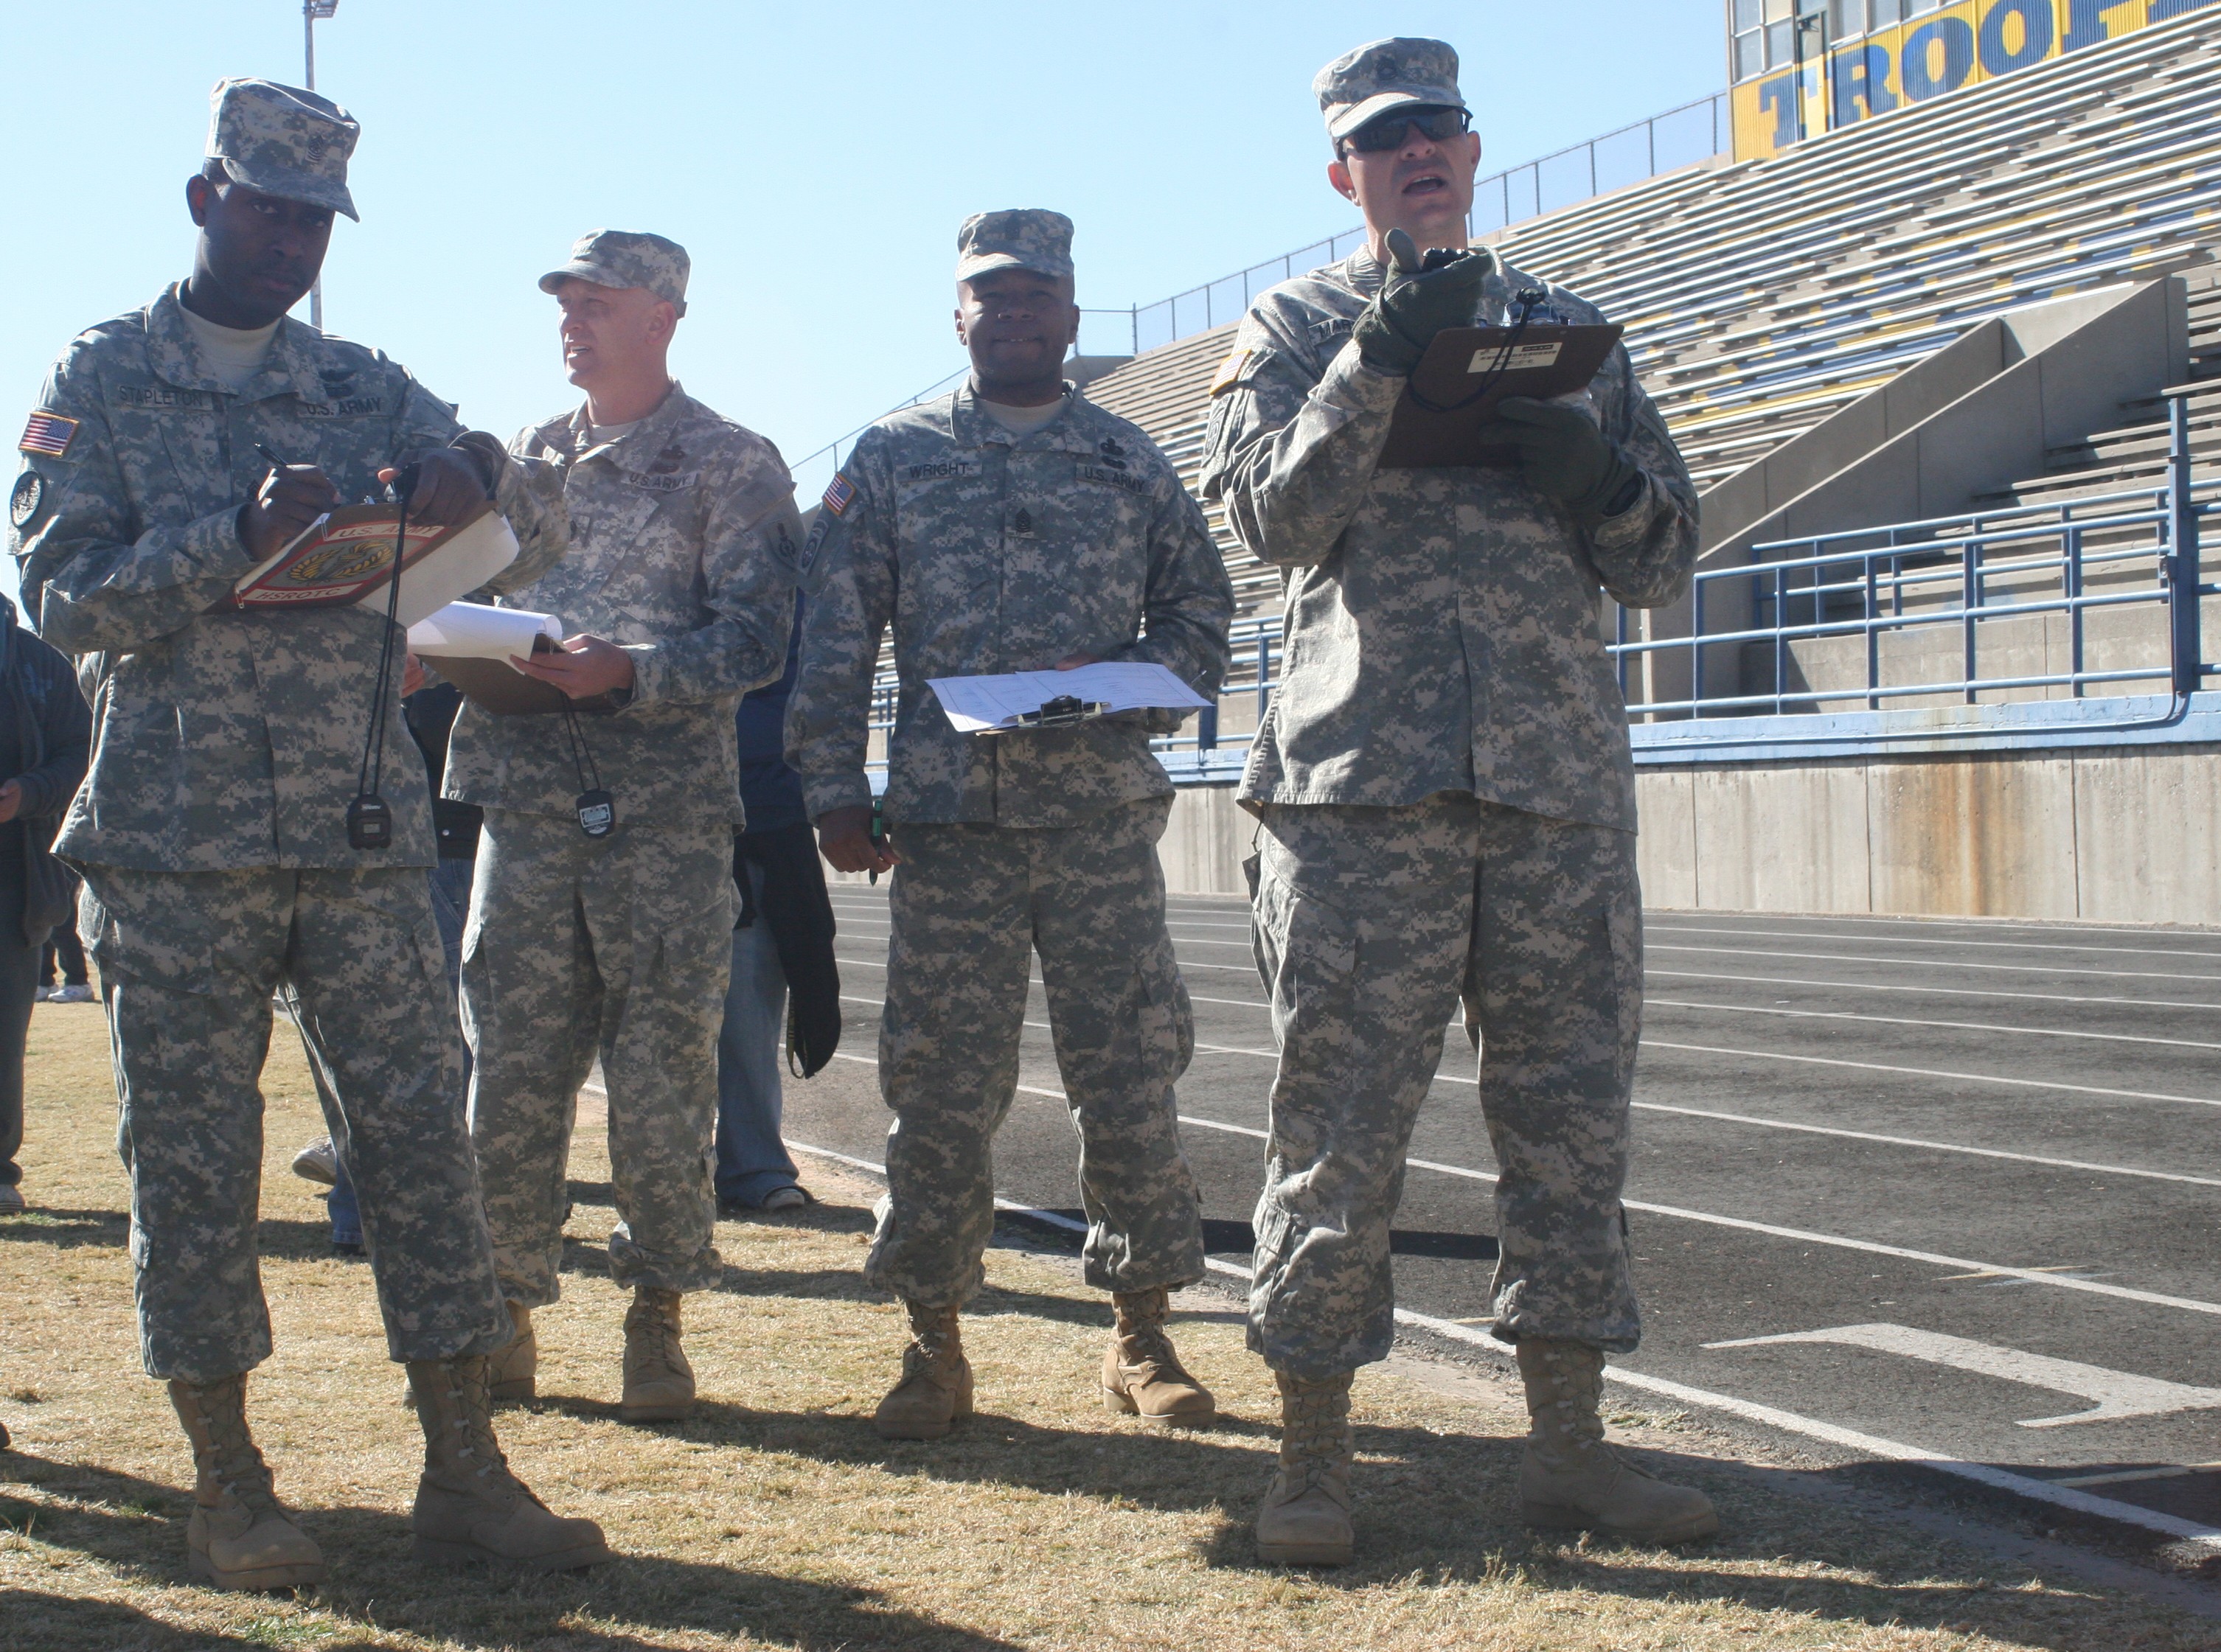 jrotc builds character and leadership